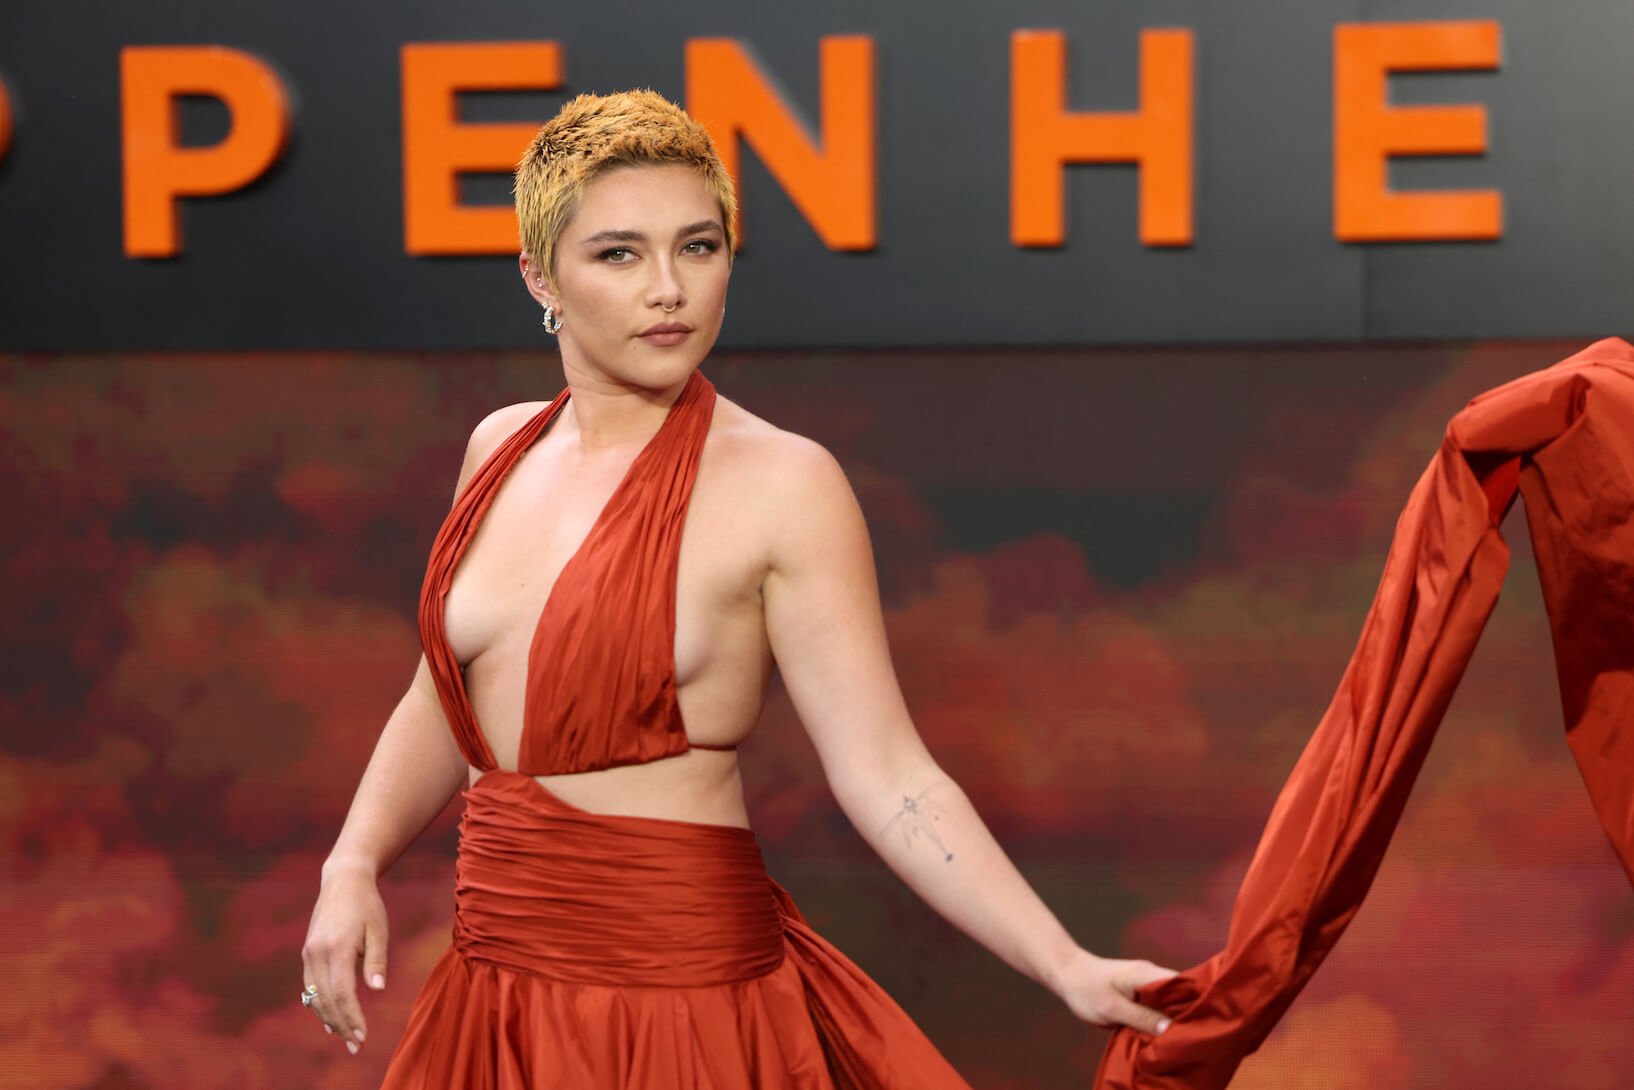 'Oppenheimer' actor Florence Pugh at the premiere